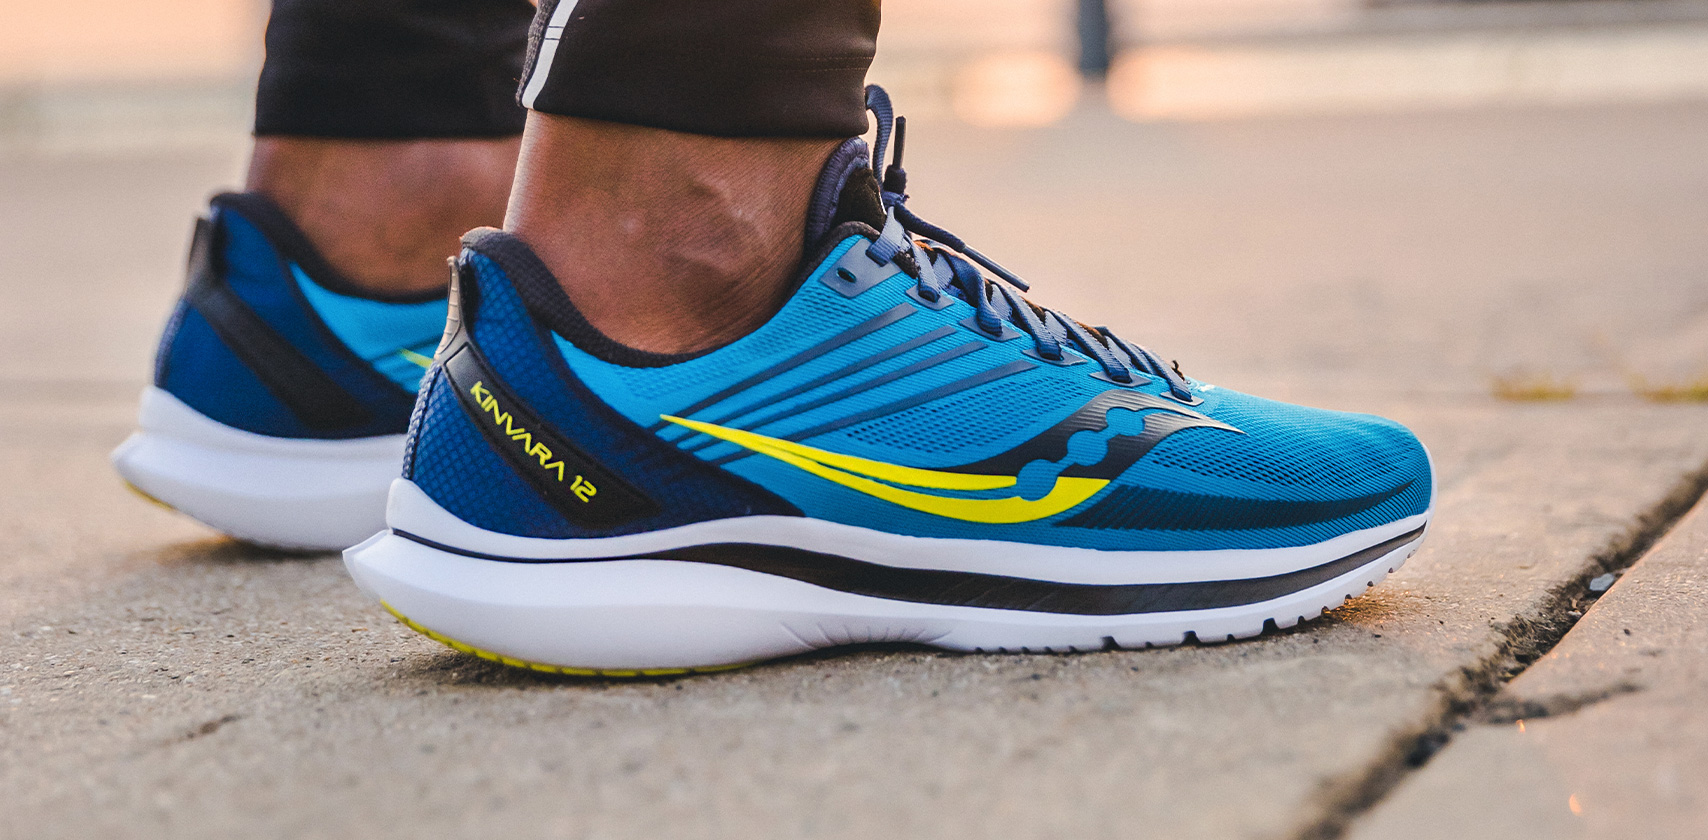 Men's Running Shoes & Running Clothes | Saucony